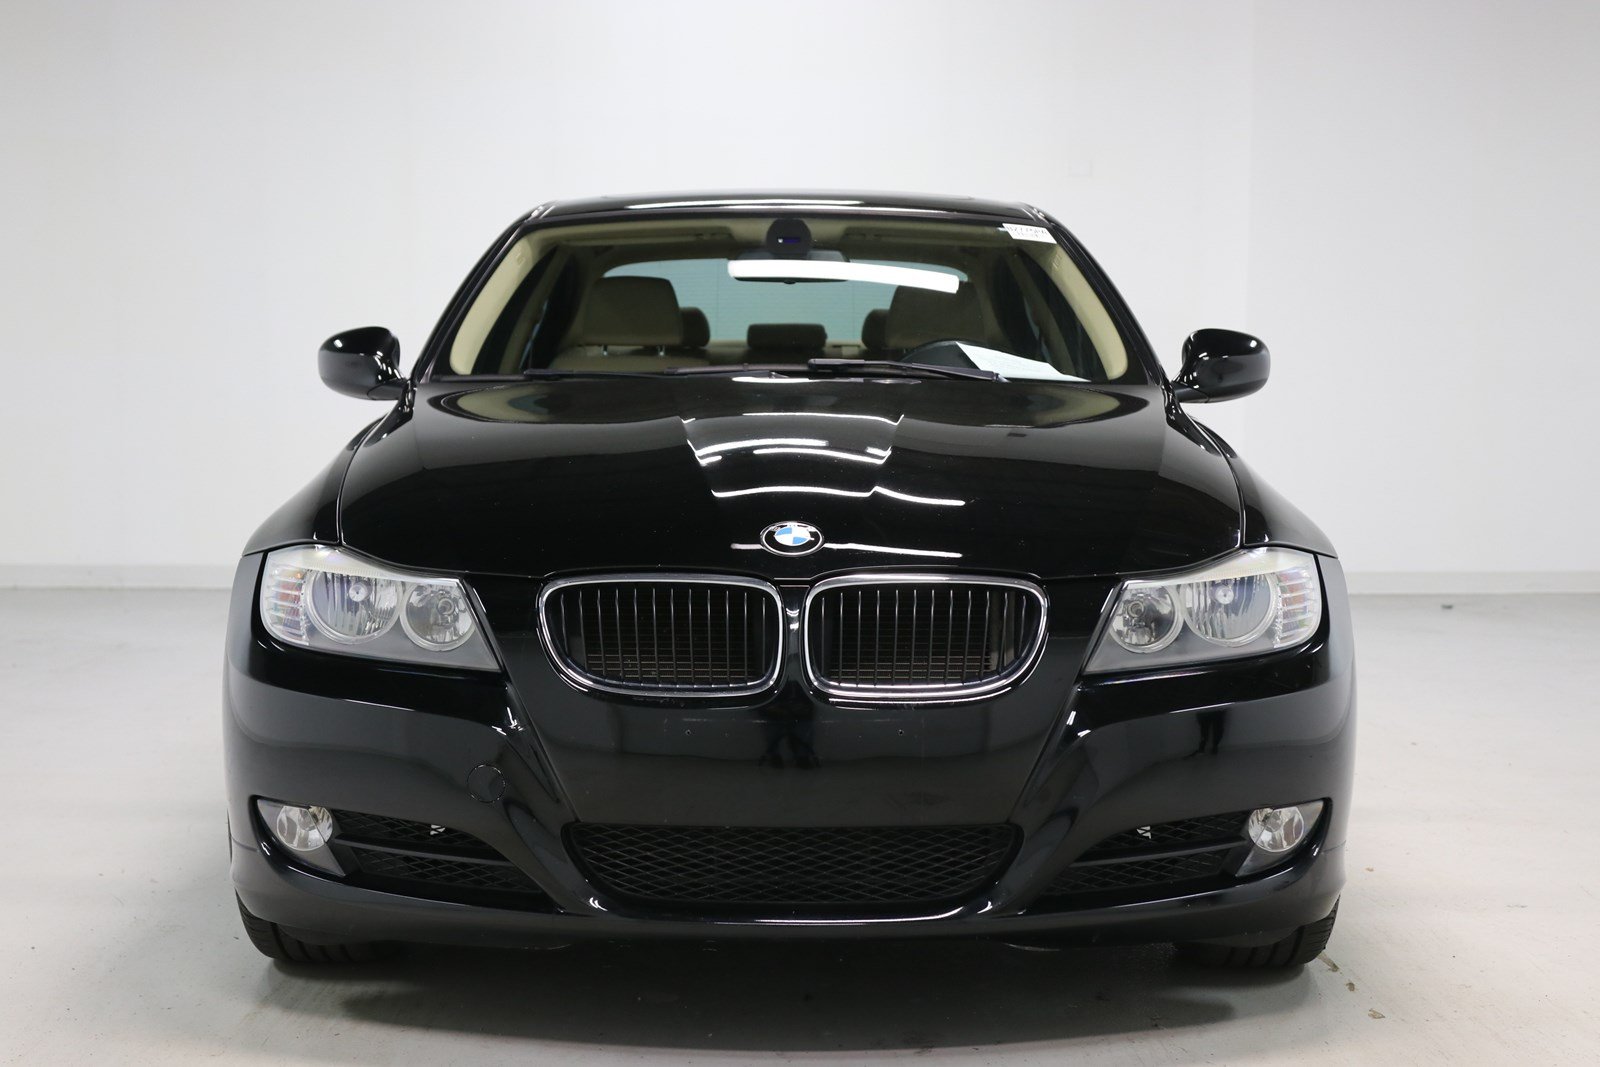 PreOwned 2011 BMW 3 Series 328i 4dr Car in Elmhurst 